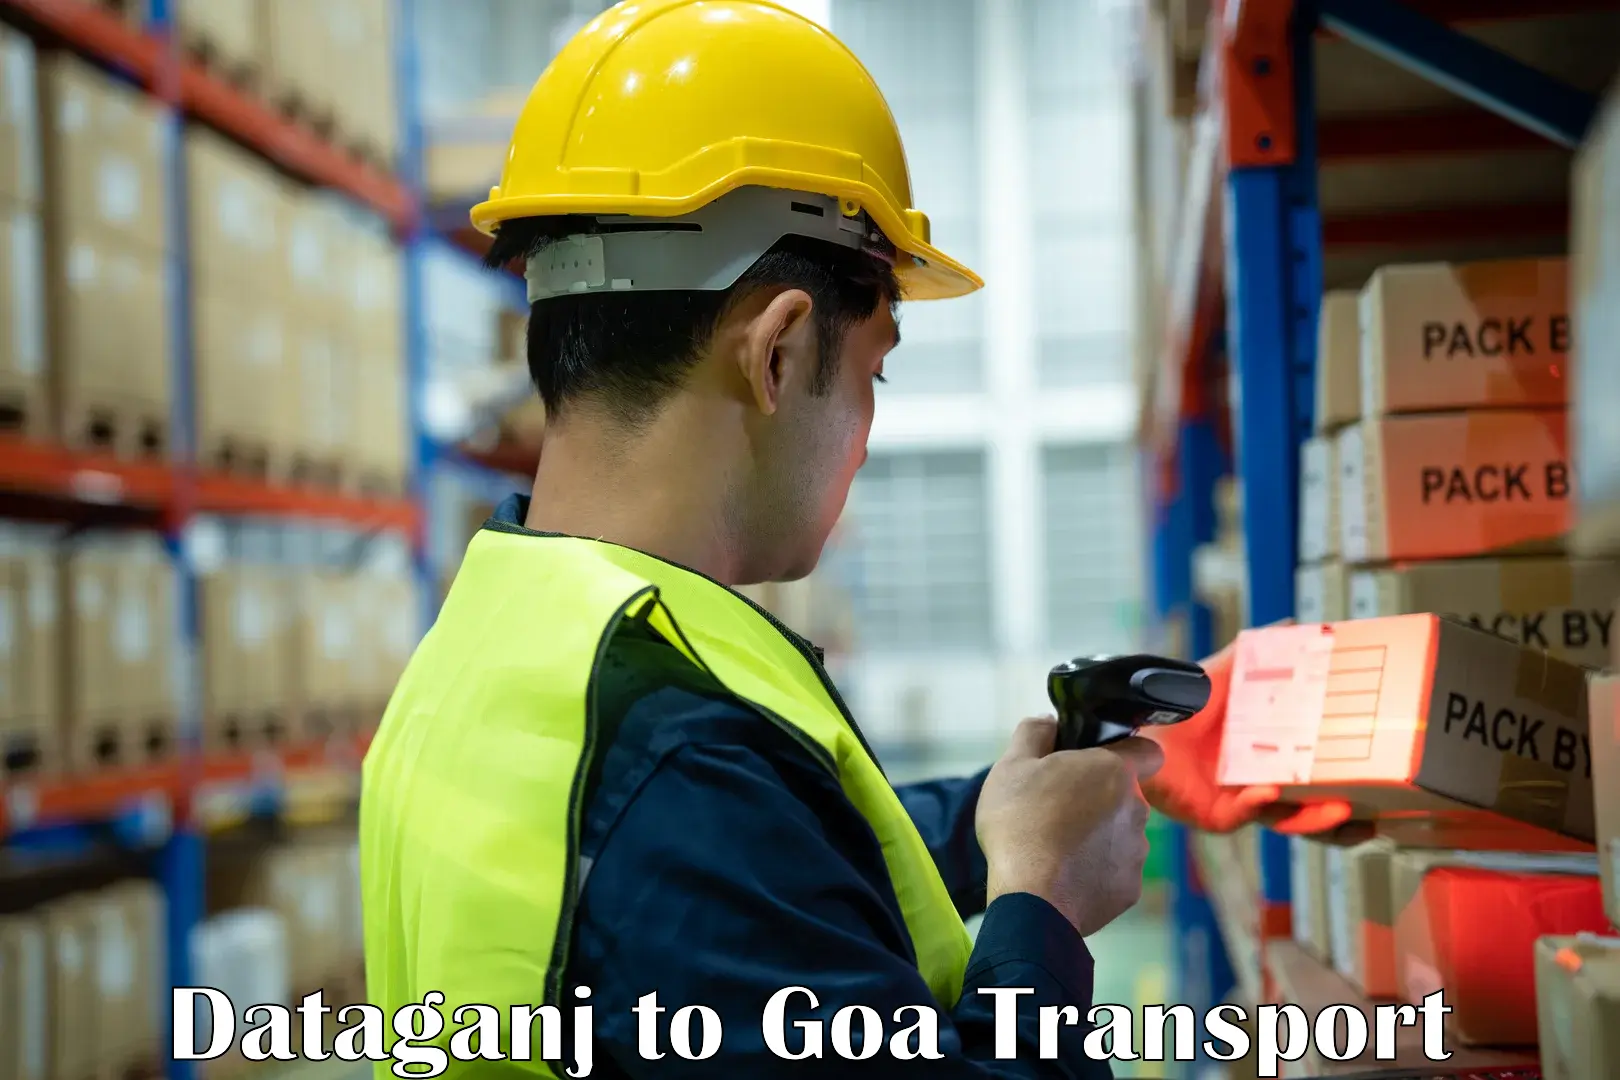 Delivery service Dataganj to Goa